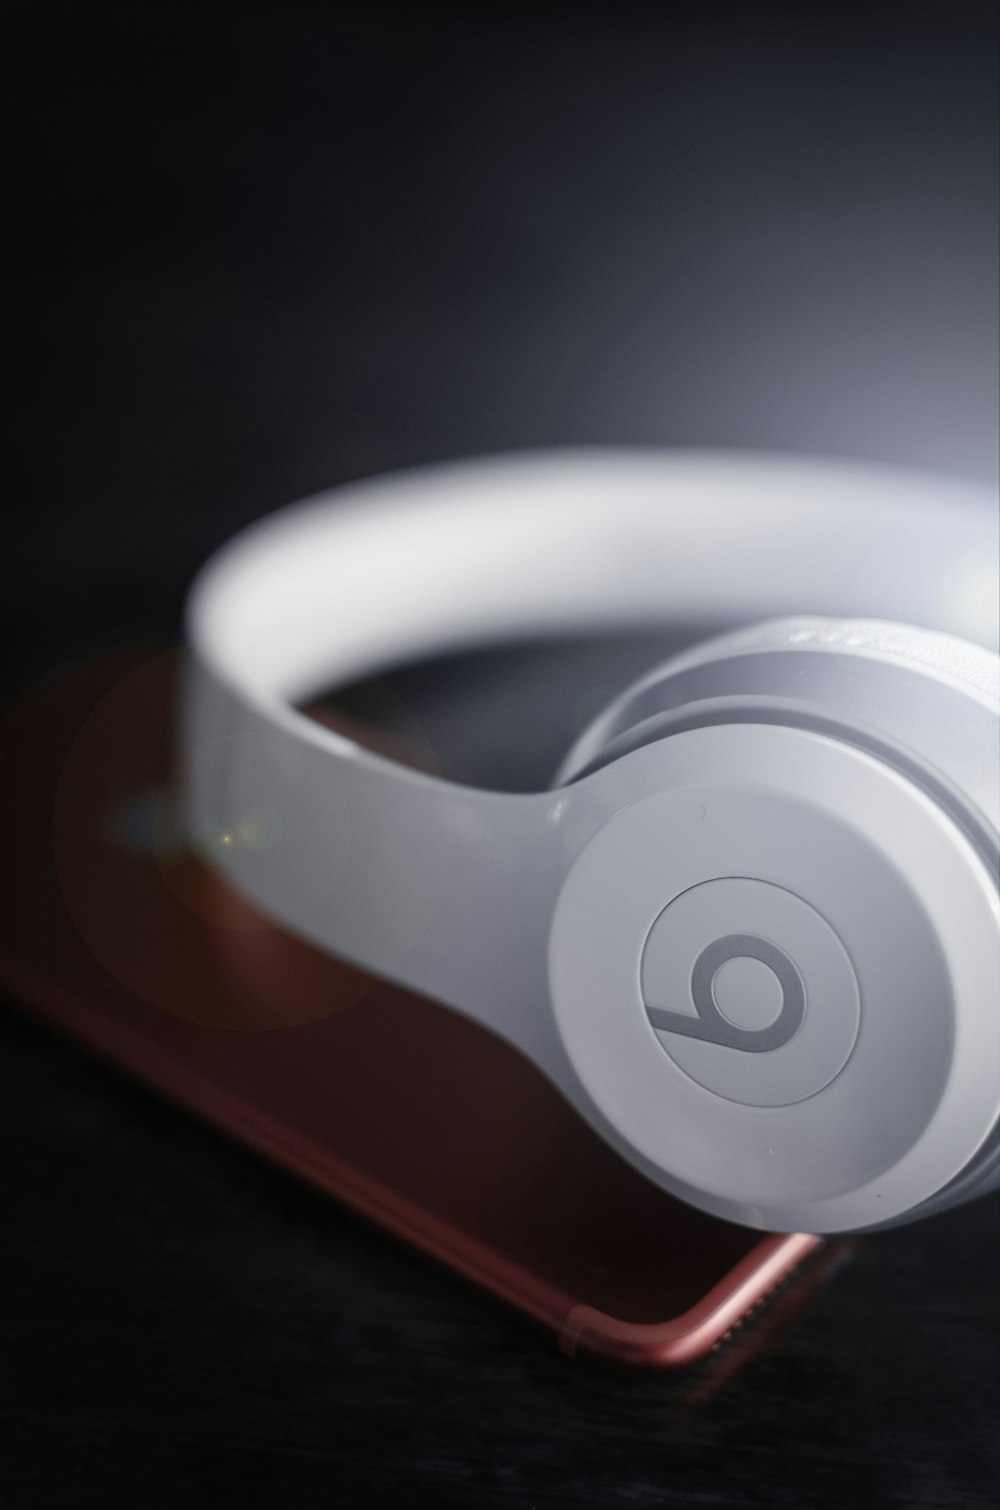 closeup photo of white Beats by Dr. Dre wireless headphones